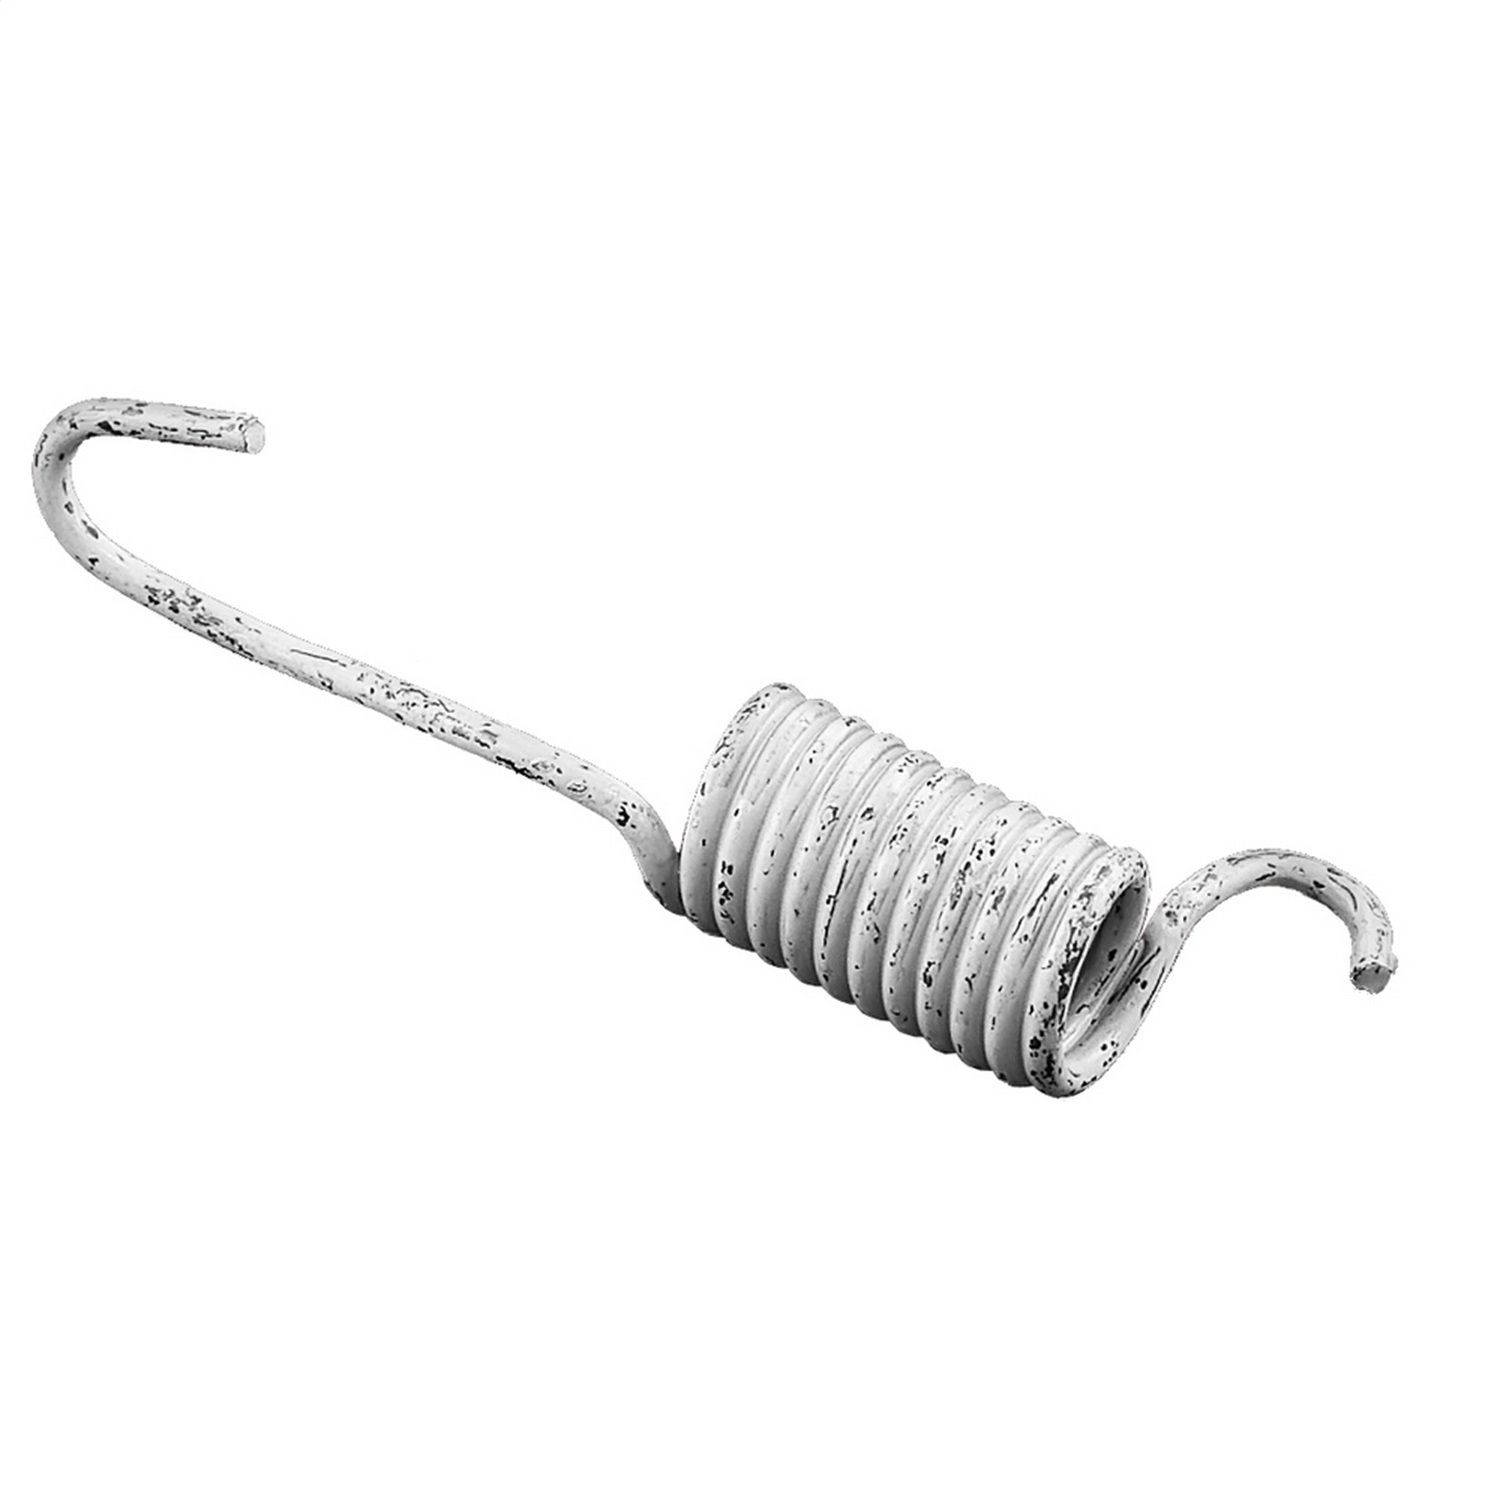 Shift Rod Spring for Dana 300 By Omix-ADA